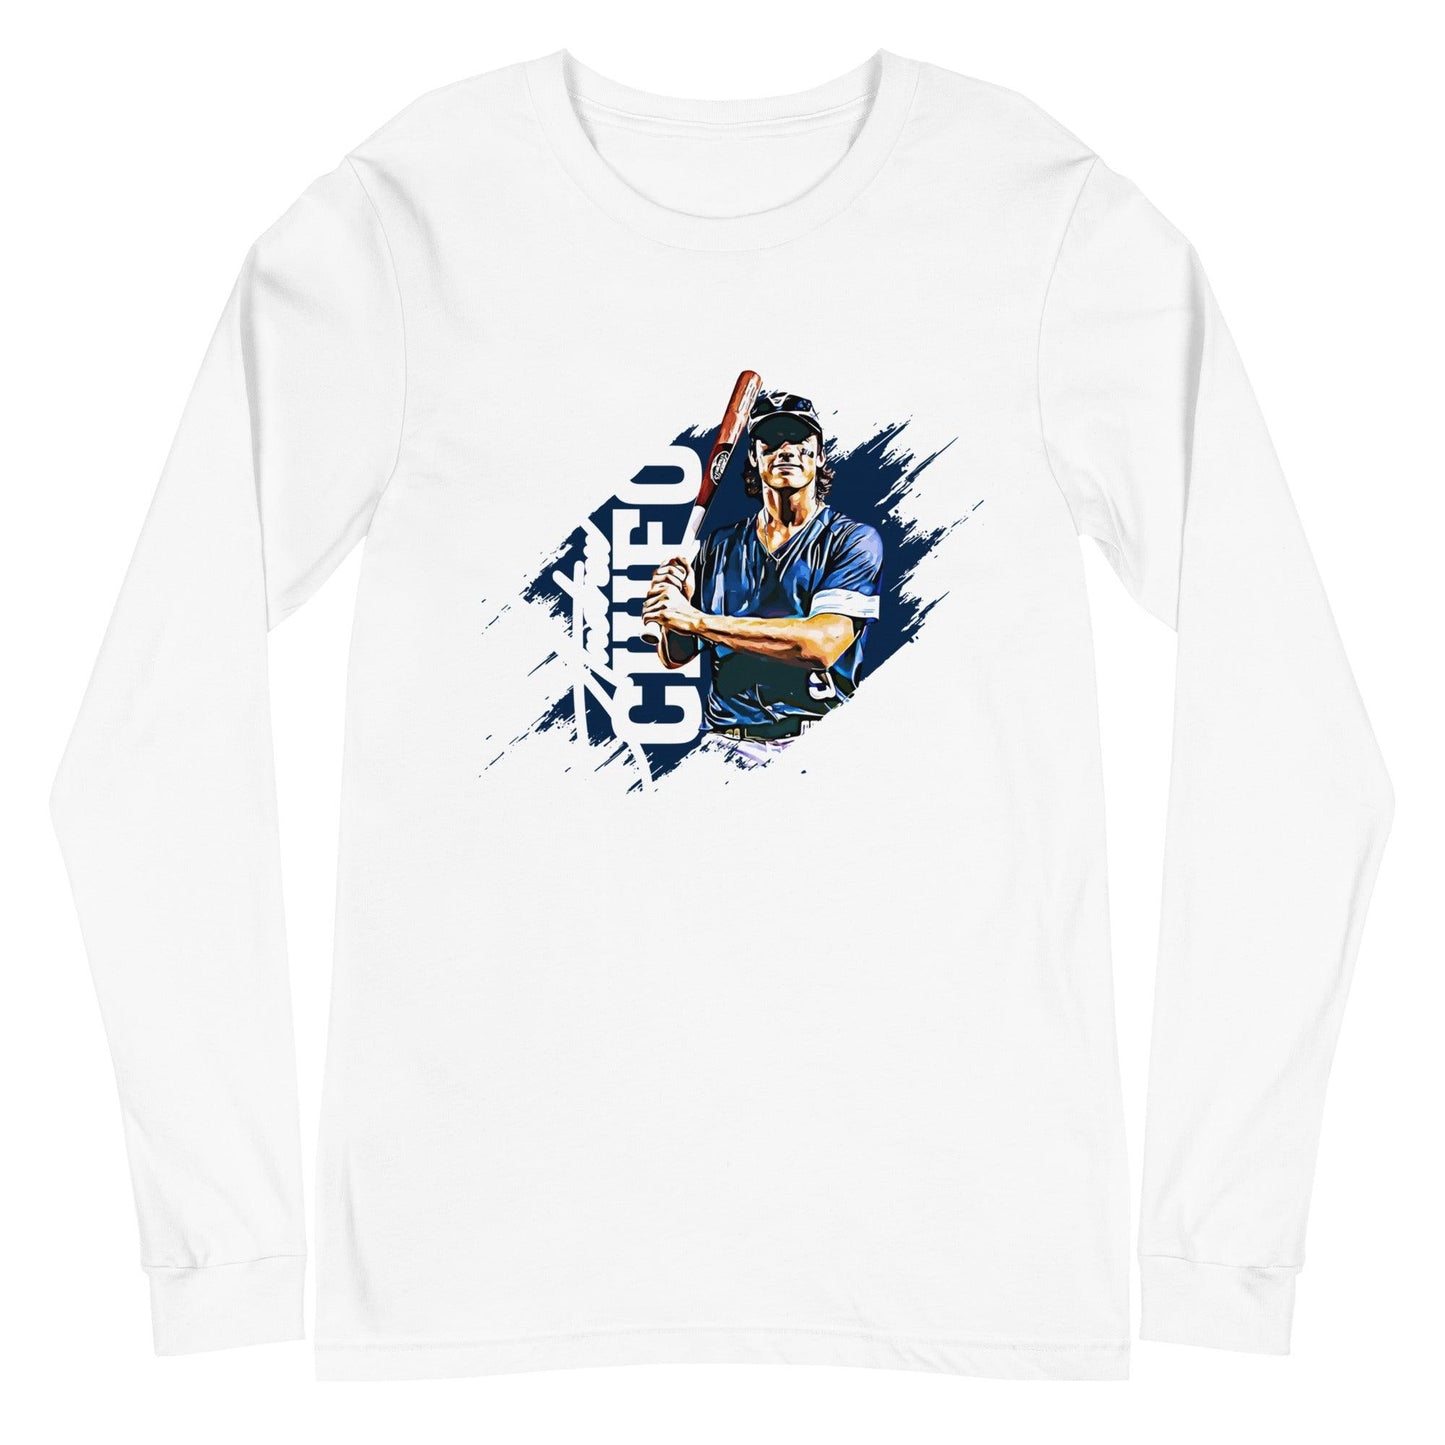 Andrew Ciufo "Gameday" Long Sleeve Tee - Fan Arch